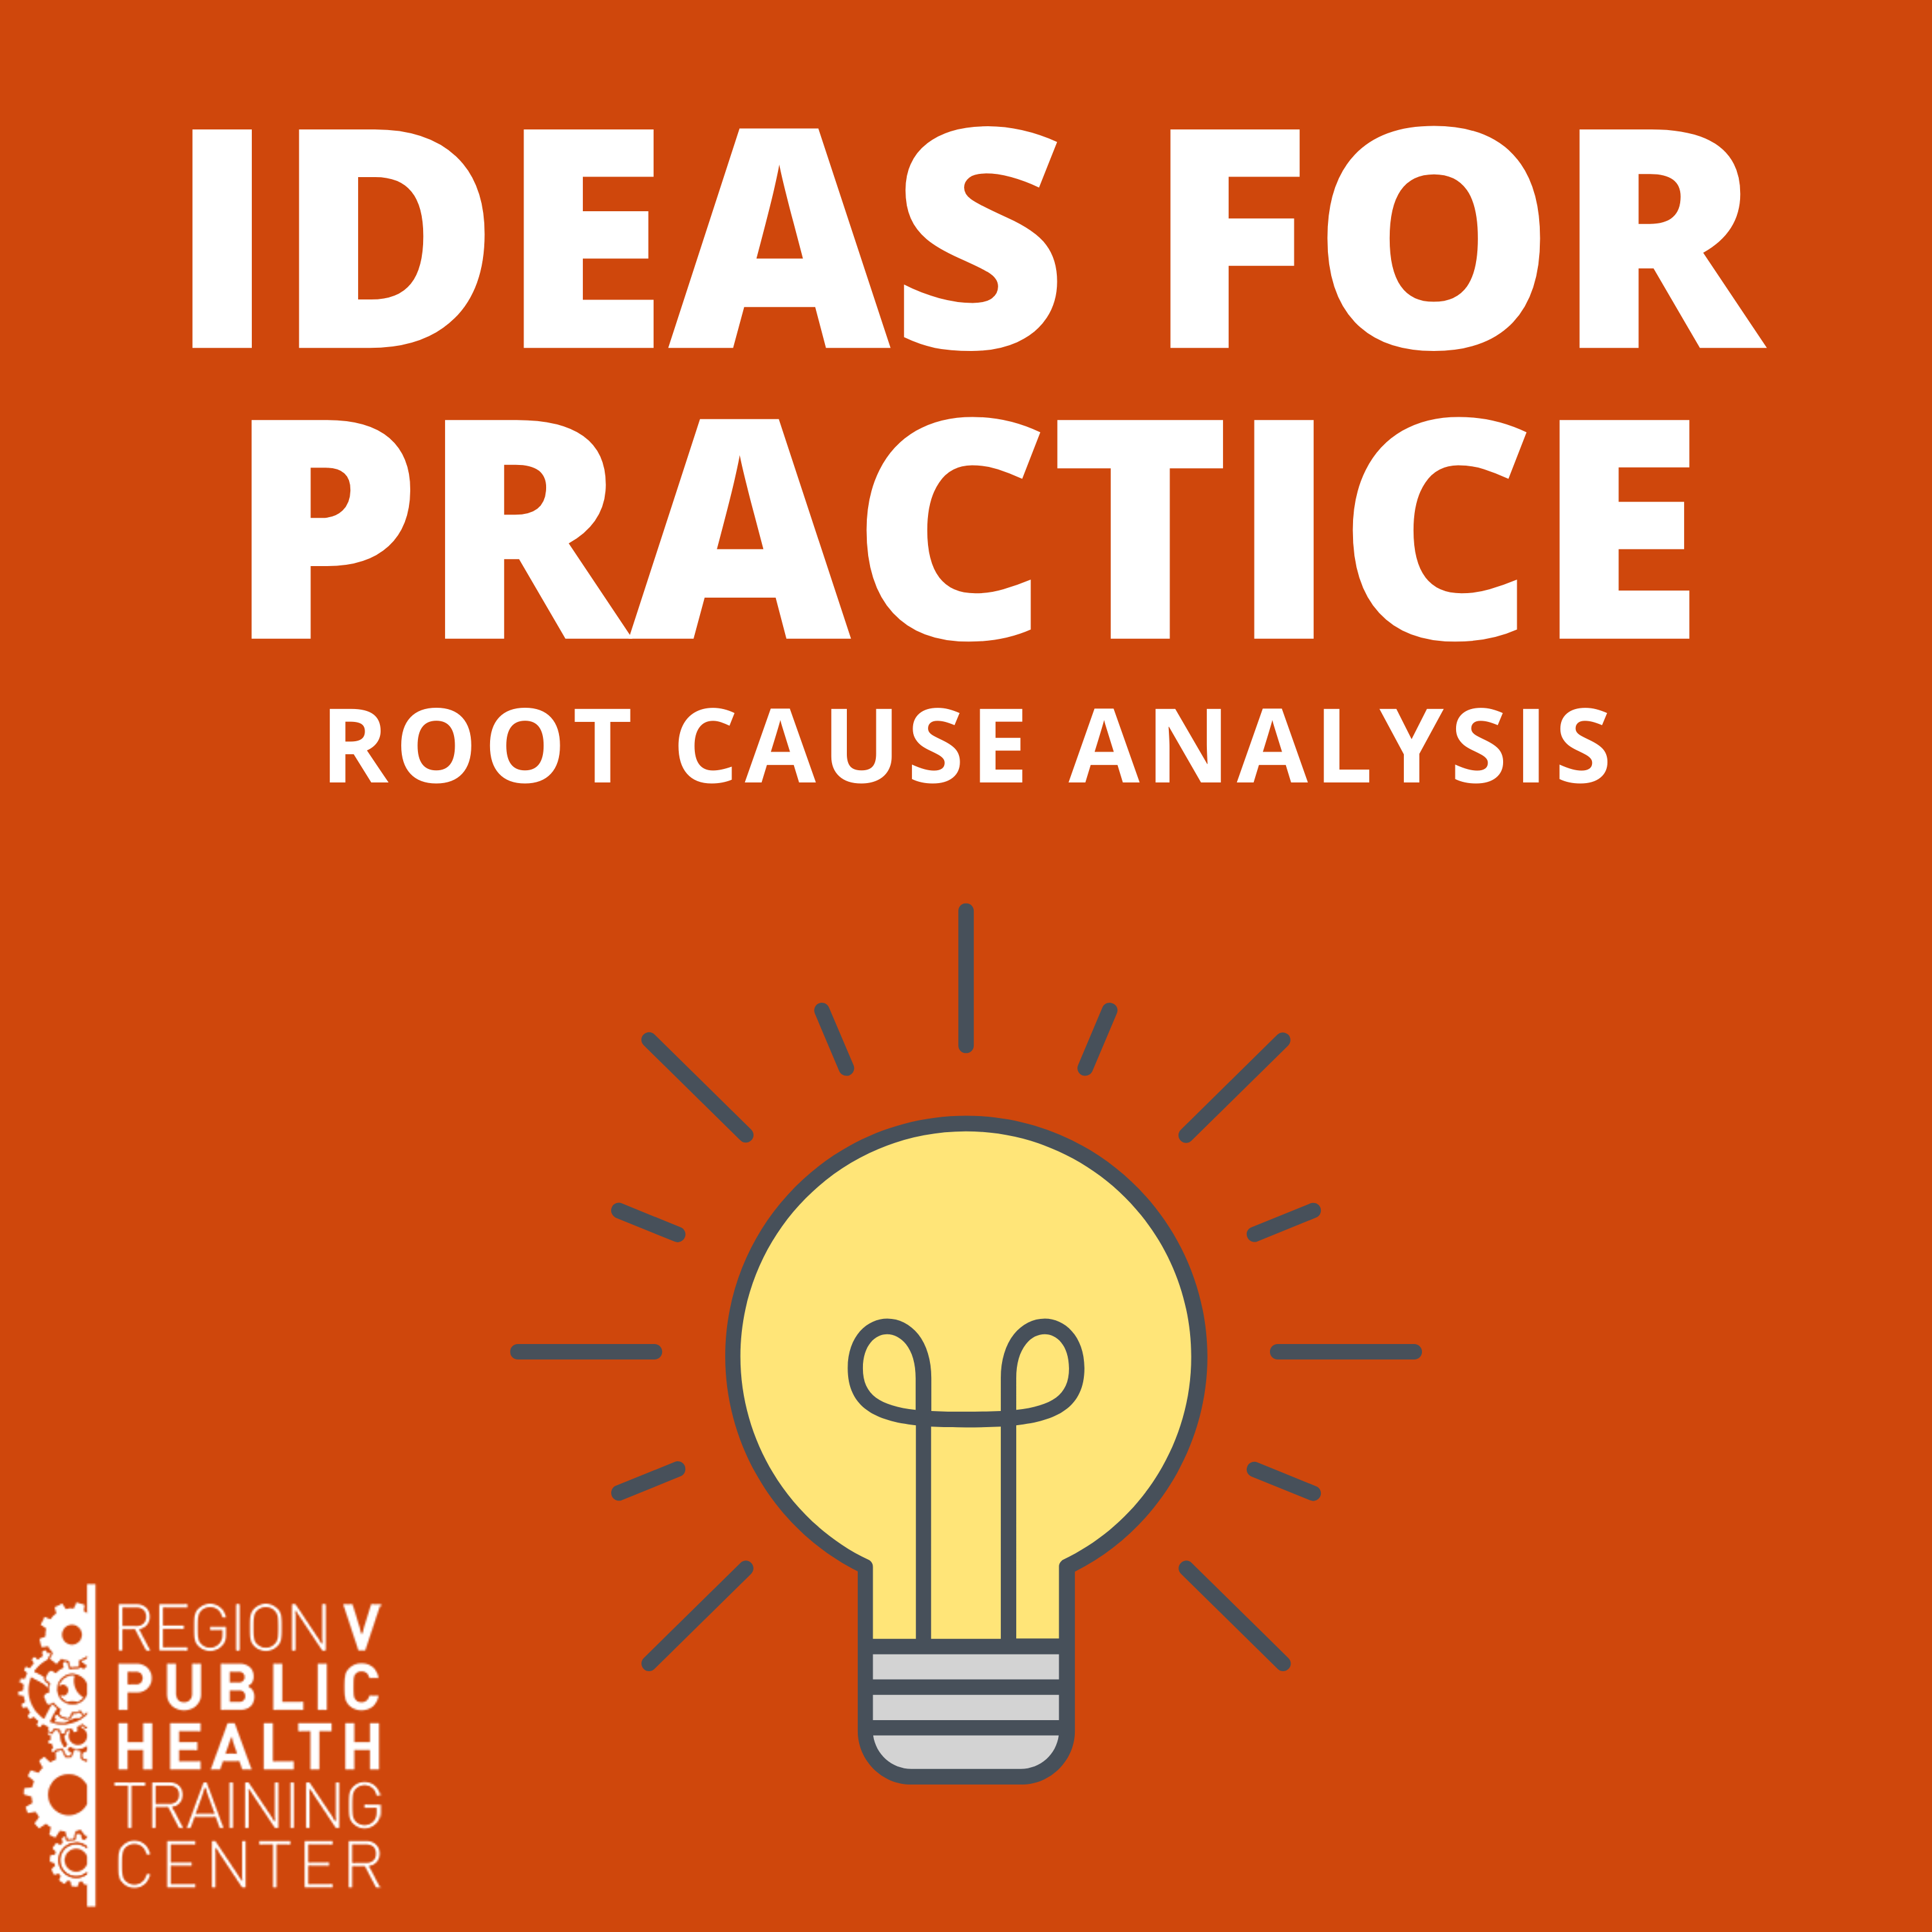 IDEAS FOR PRACTICE: ROOT CAUSE ANALYSIS with lightbulb icon and Region V Public Health Training Center logo